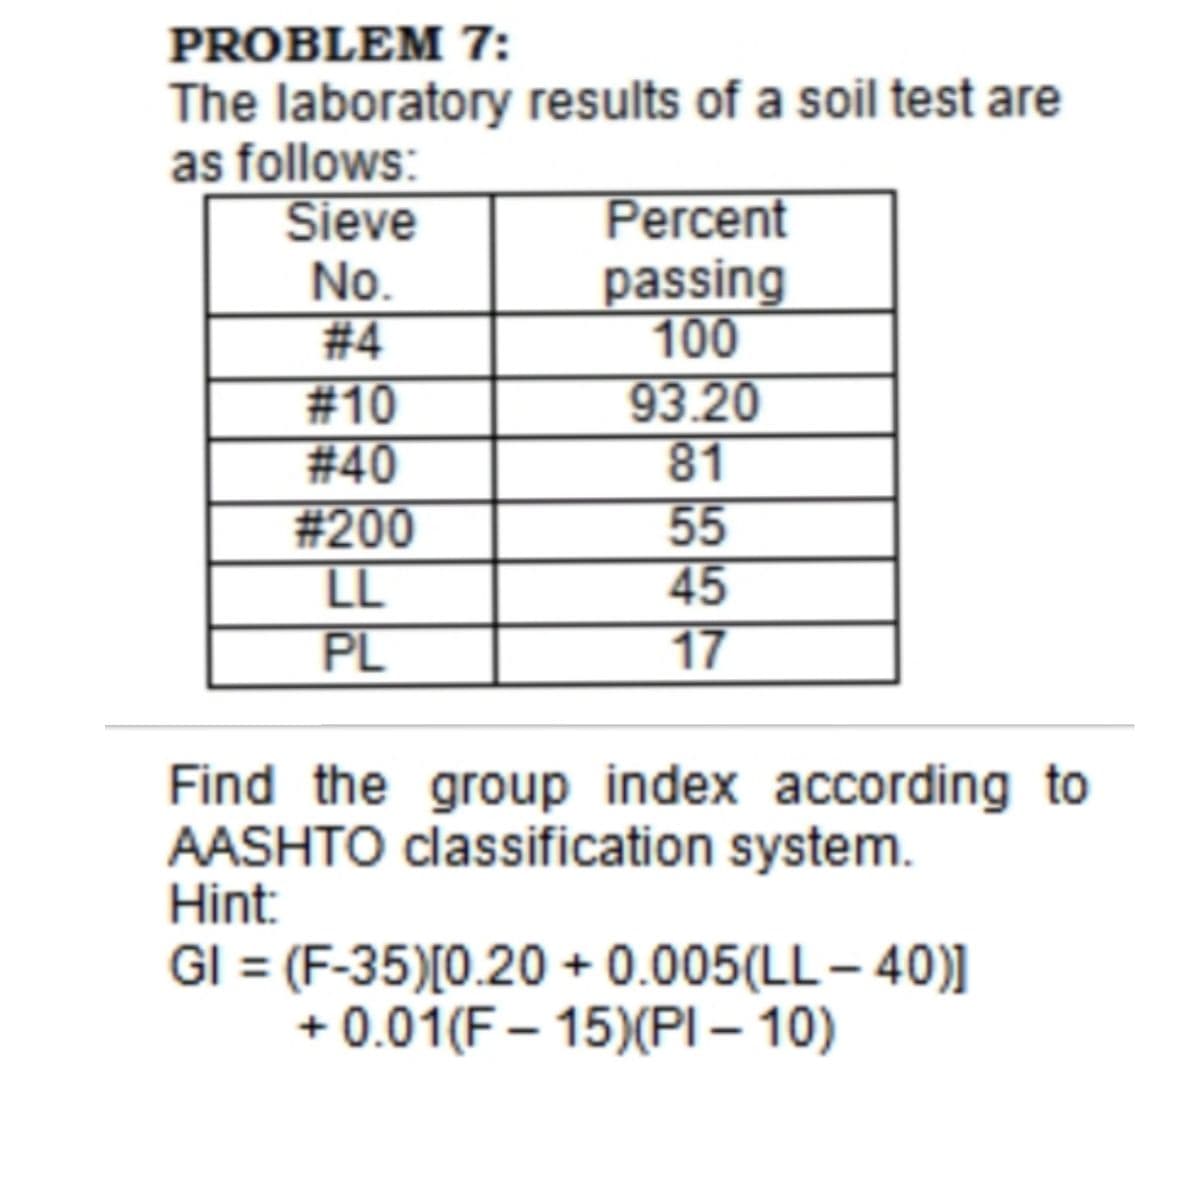 PROBLEM 7:
The laboratory results of a soil test are
as follows:
Sieve
No.
# 4
#10
#40
#200
LL
PL
Percent
passing
100
93.20
81
55
45
17
Find the group index according to
AASHTO classification system.
Hint:
GI = (F-35)[0.20 + 0.005(LL – 40)]
+ 0.01(F – 15)(PI – 10)
